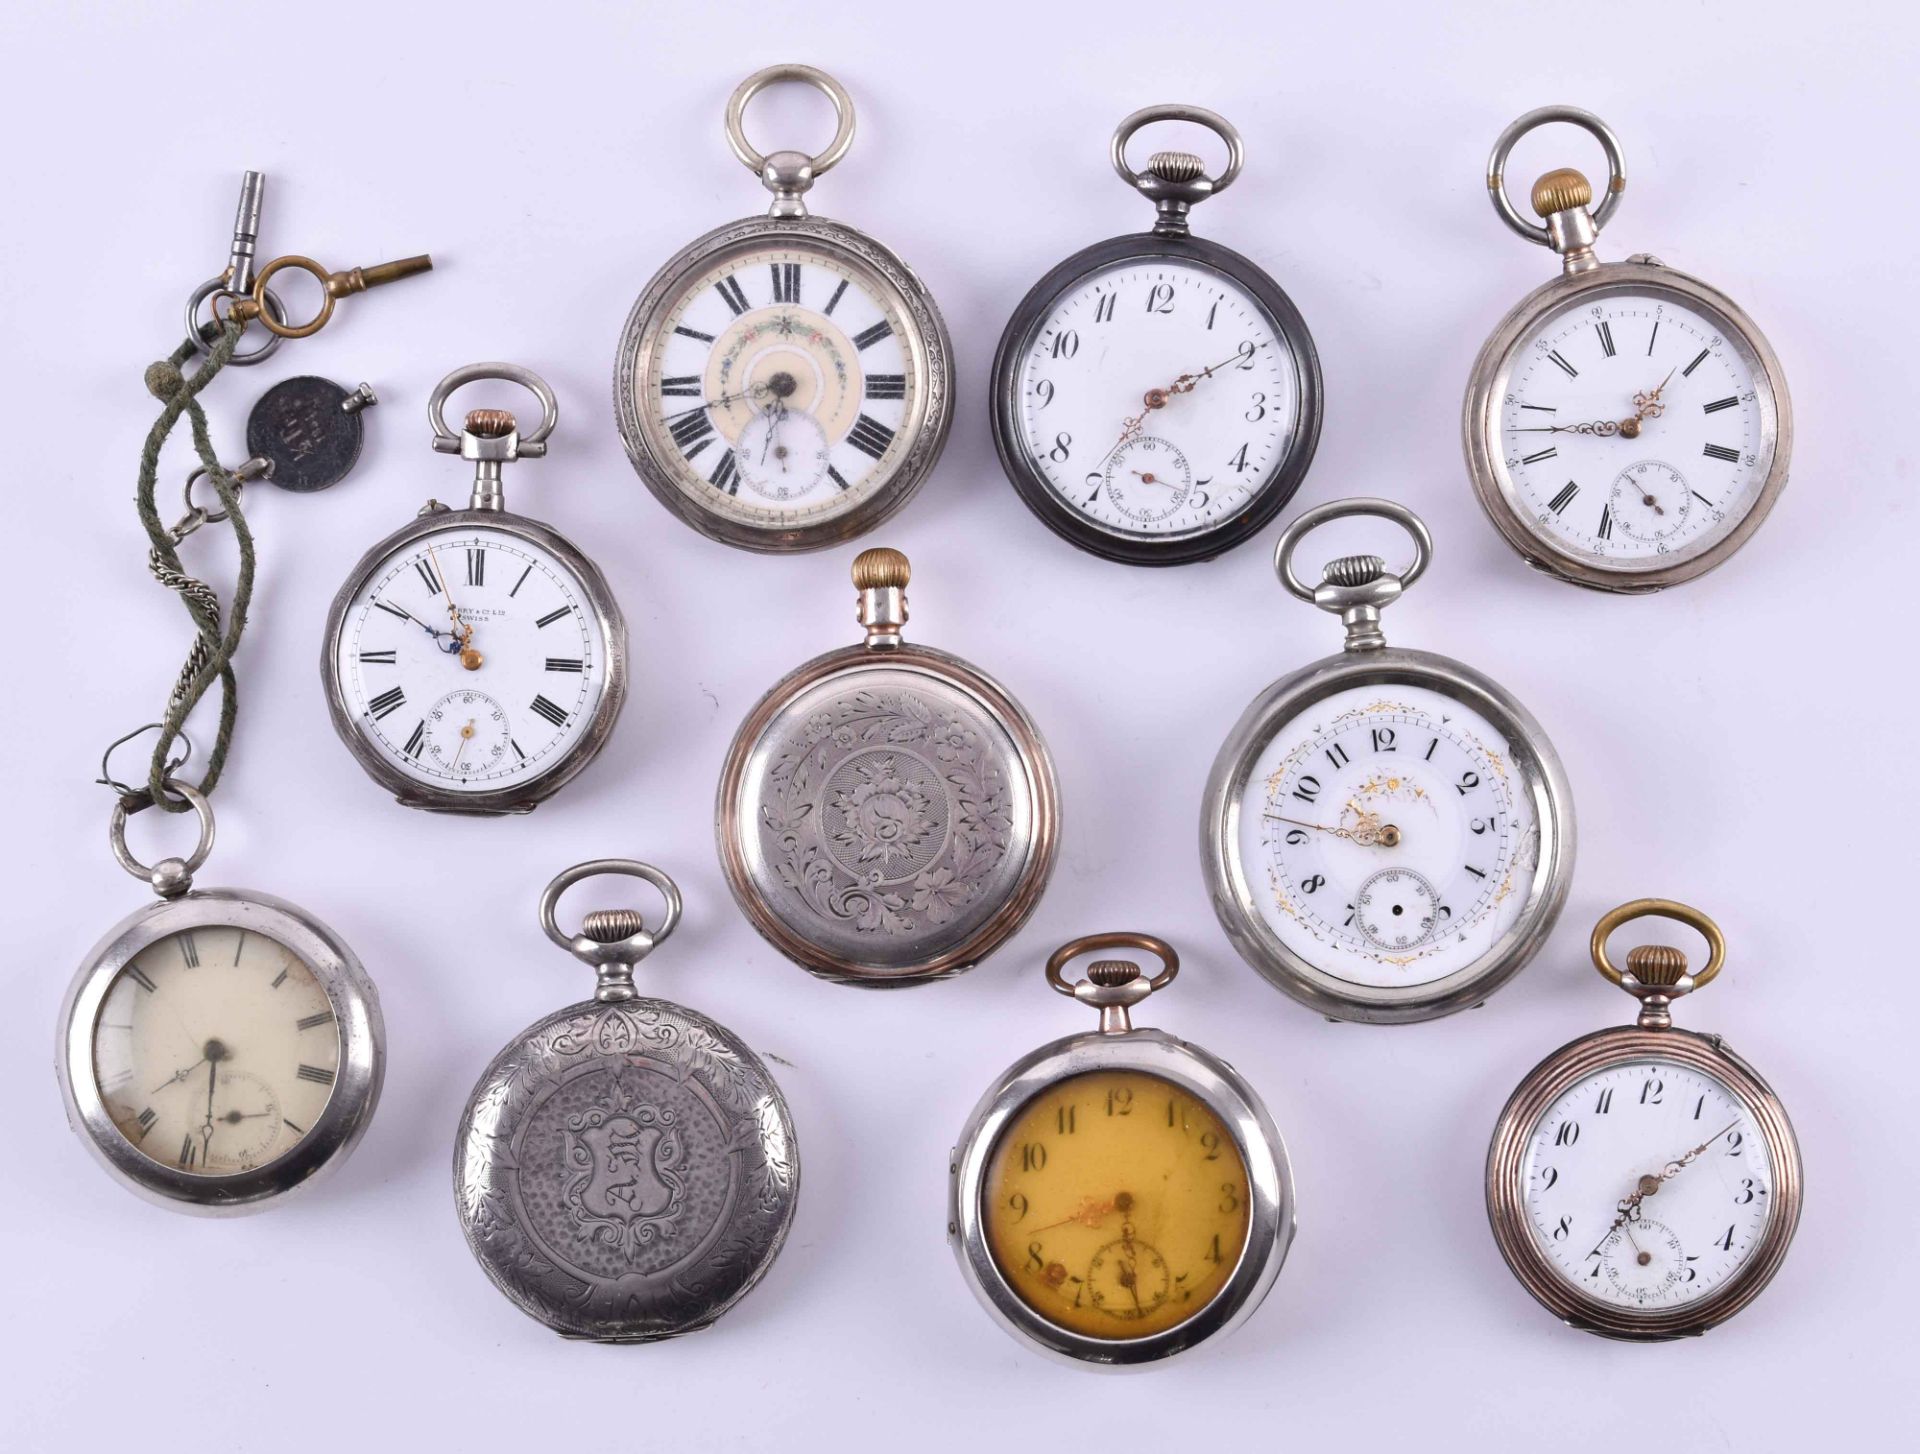 A group of 10 pocket watches5 x silver, mostly defective, 2-3 capsule watchesKonvolut 10